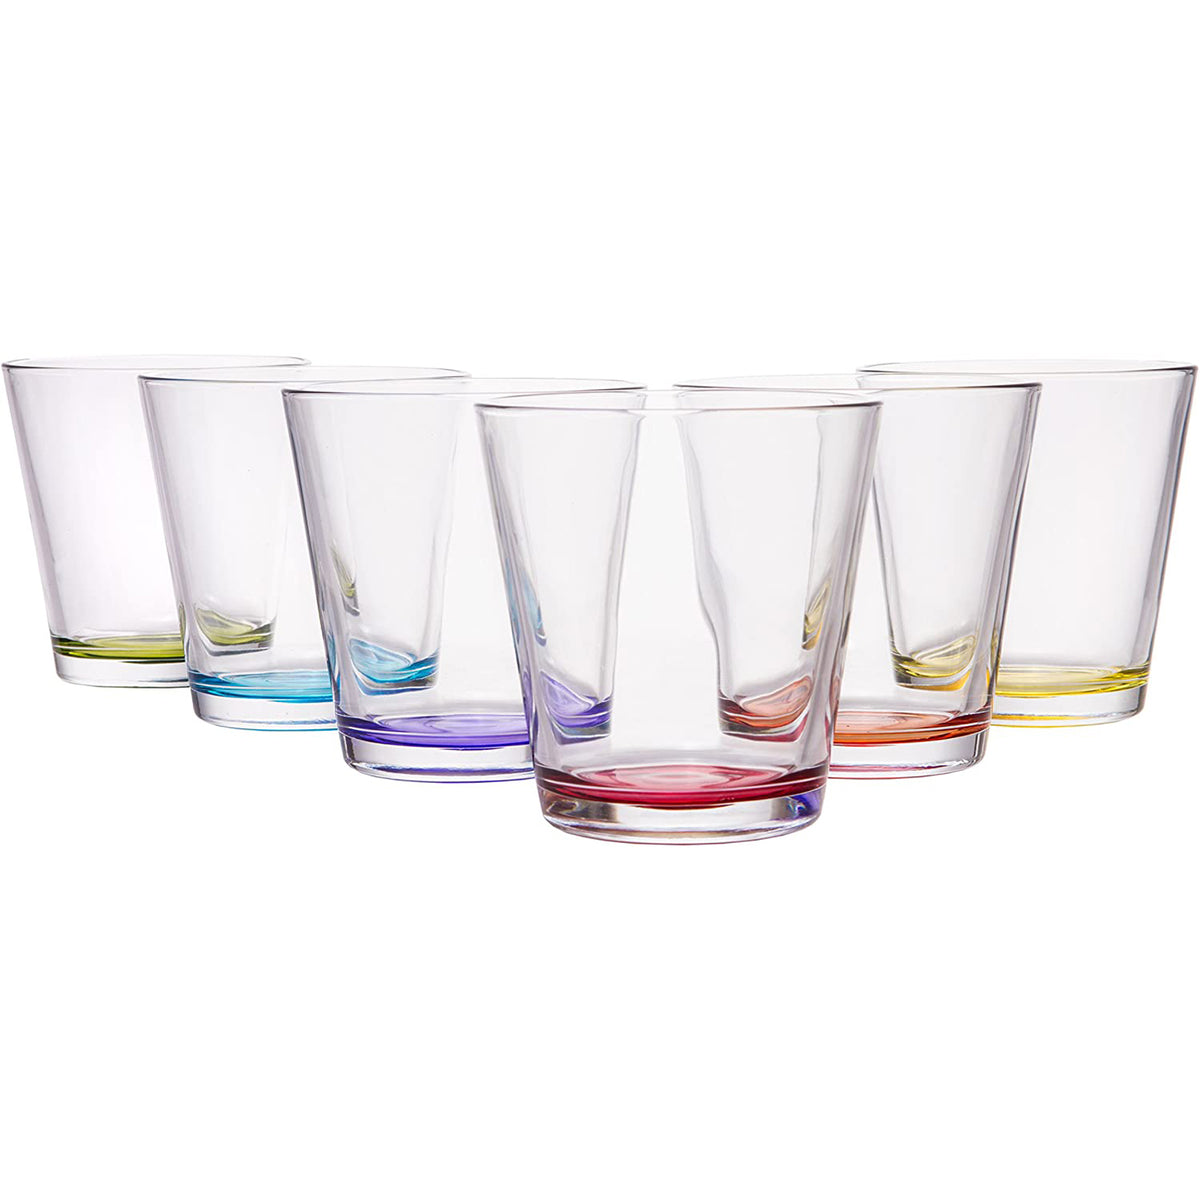 LAV Drinking Glasses Set of 6, Kitchen Durable Tumbler, Water and